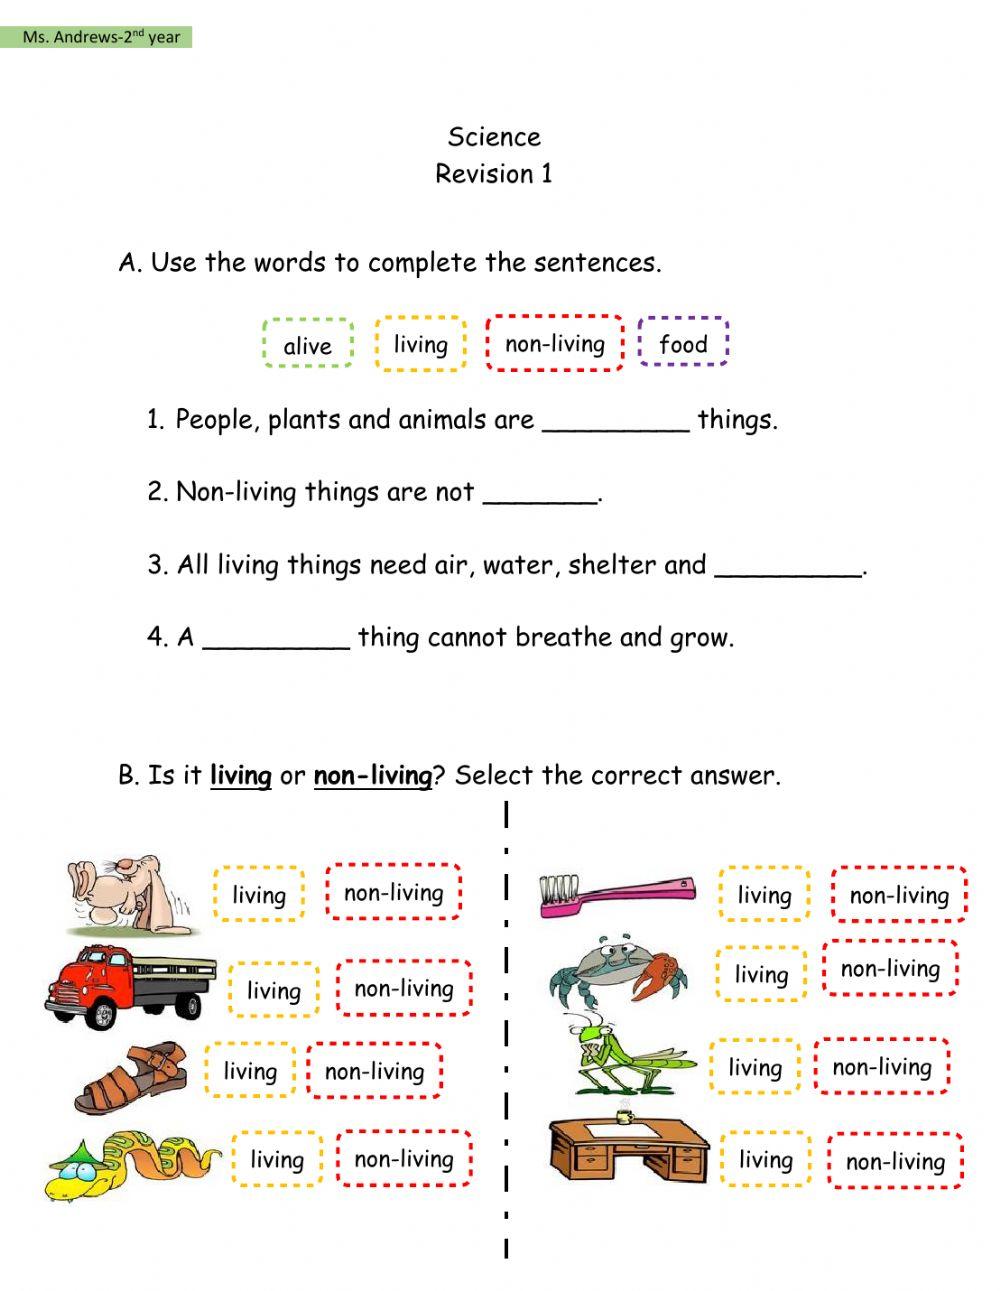 Science Revision 1